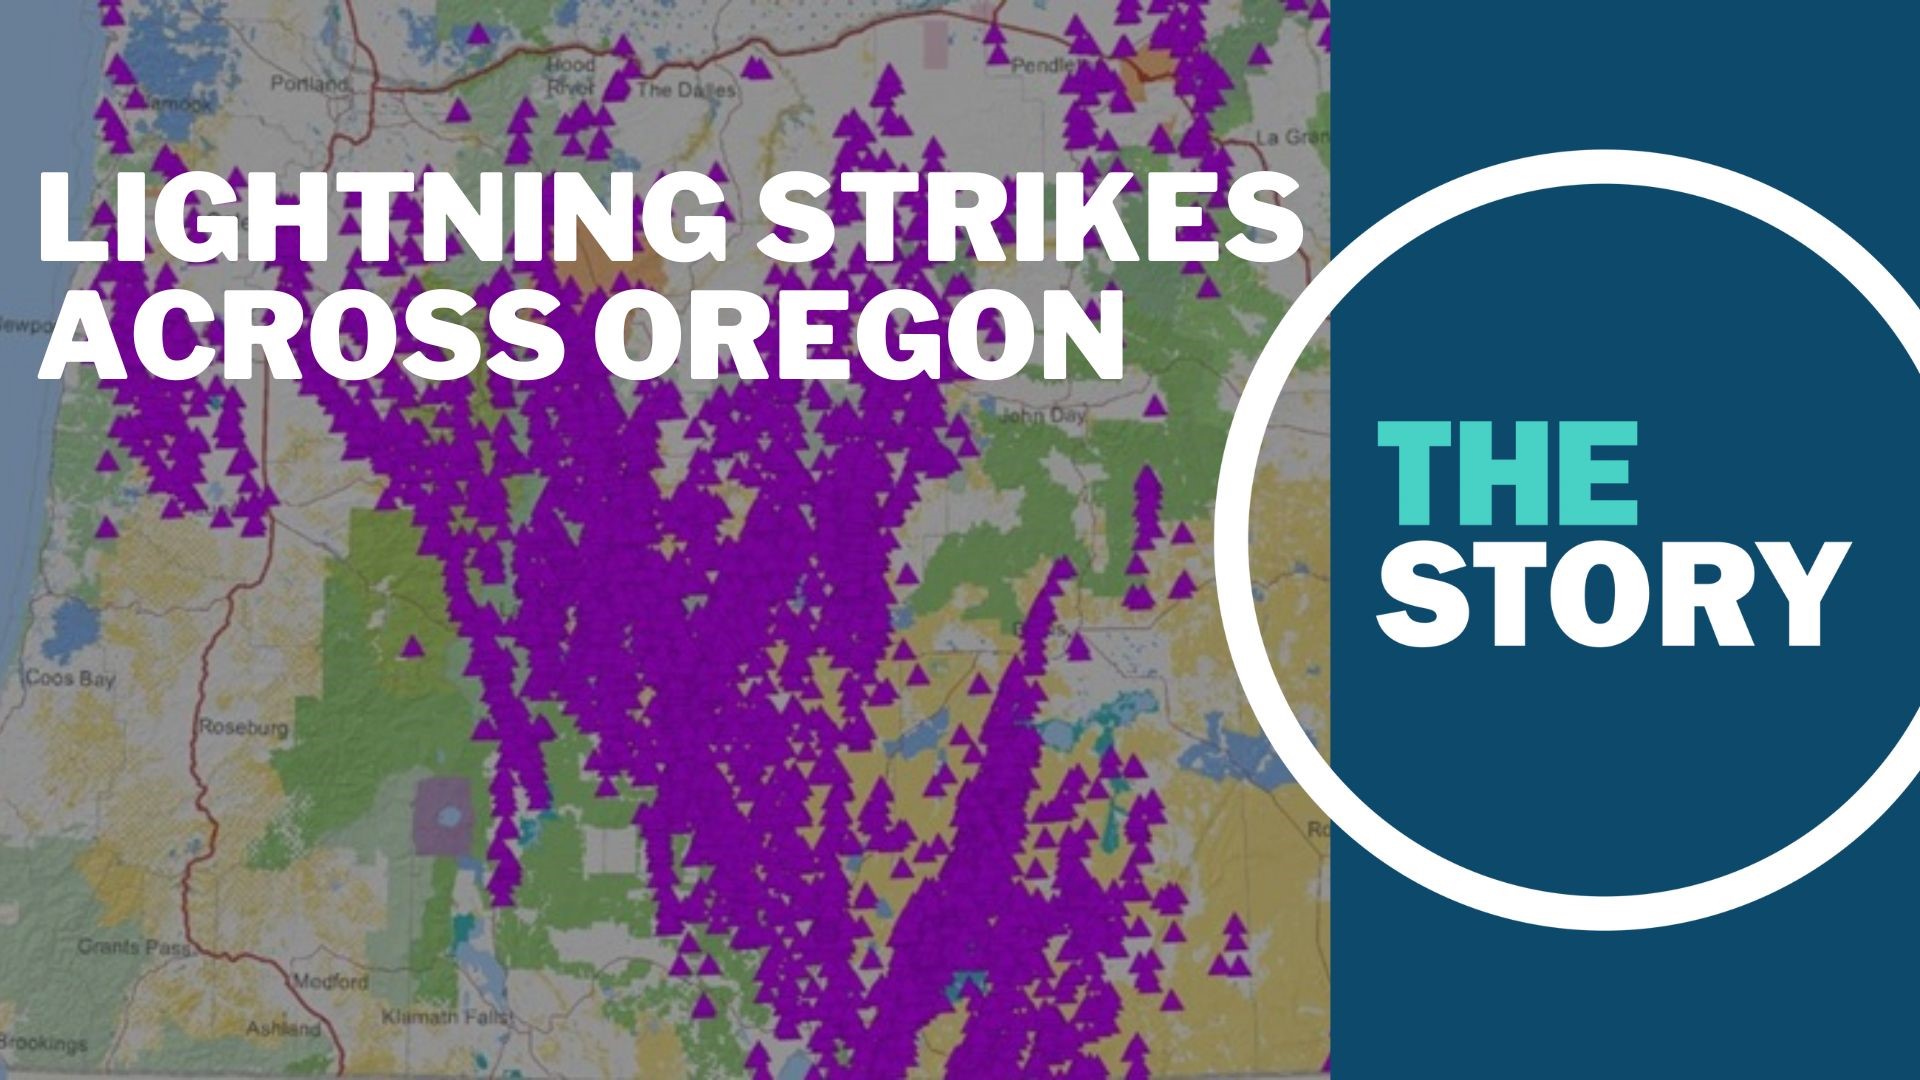 The lightning strikes started 92 fires statewide, but none of them grew to become a major threat.